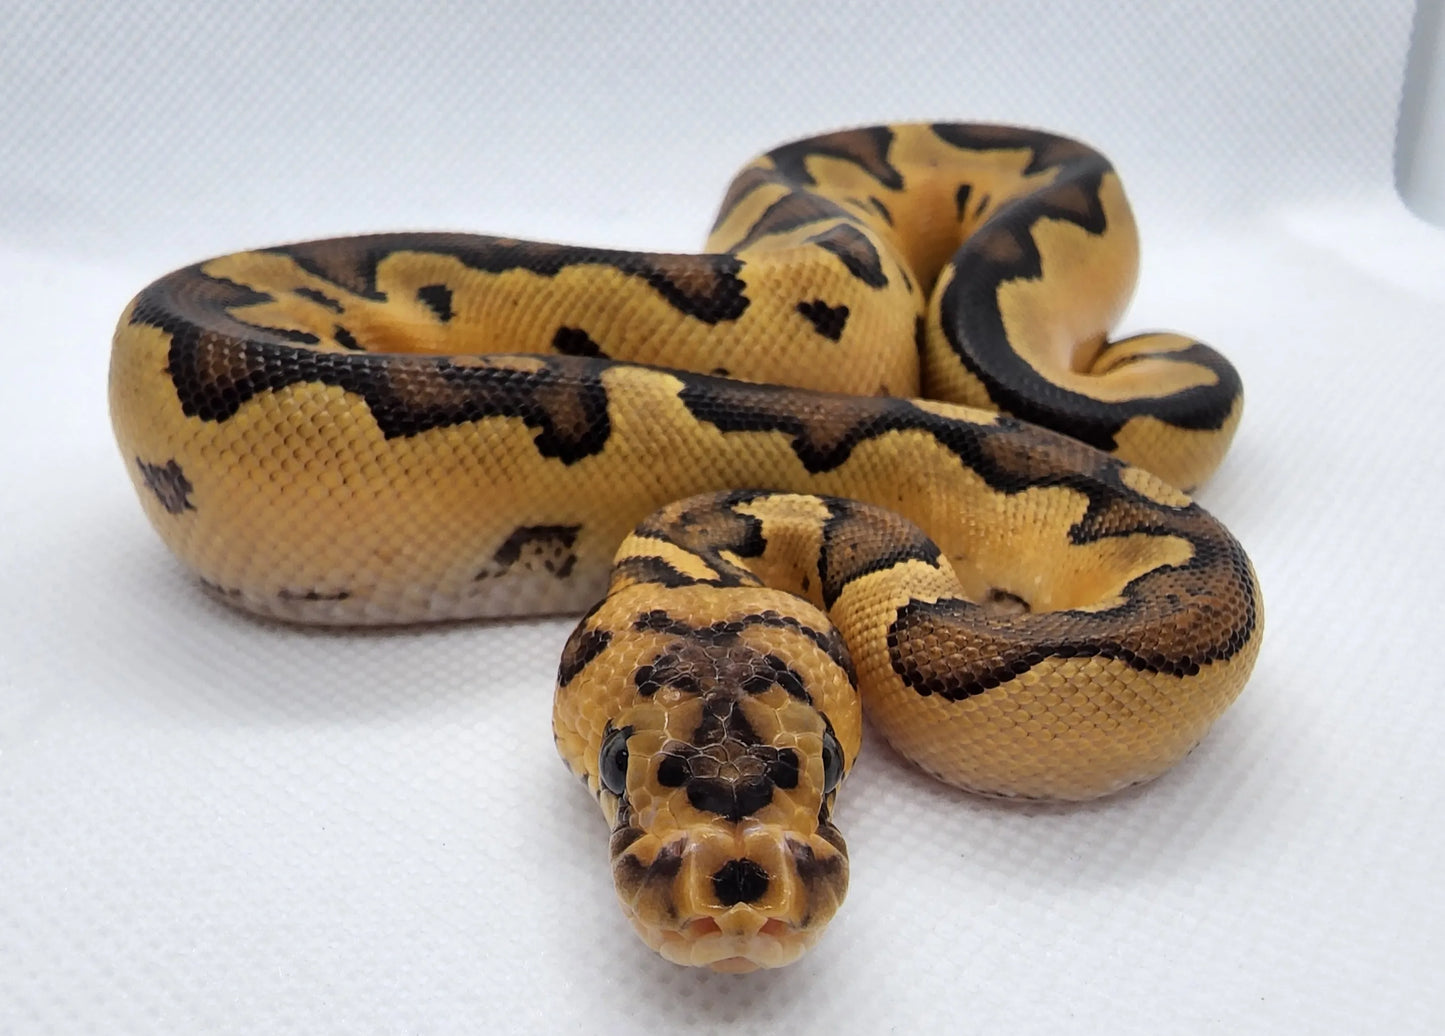 Blade Spotnose YellowBelly Clown Male